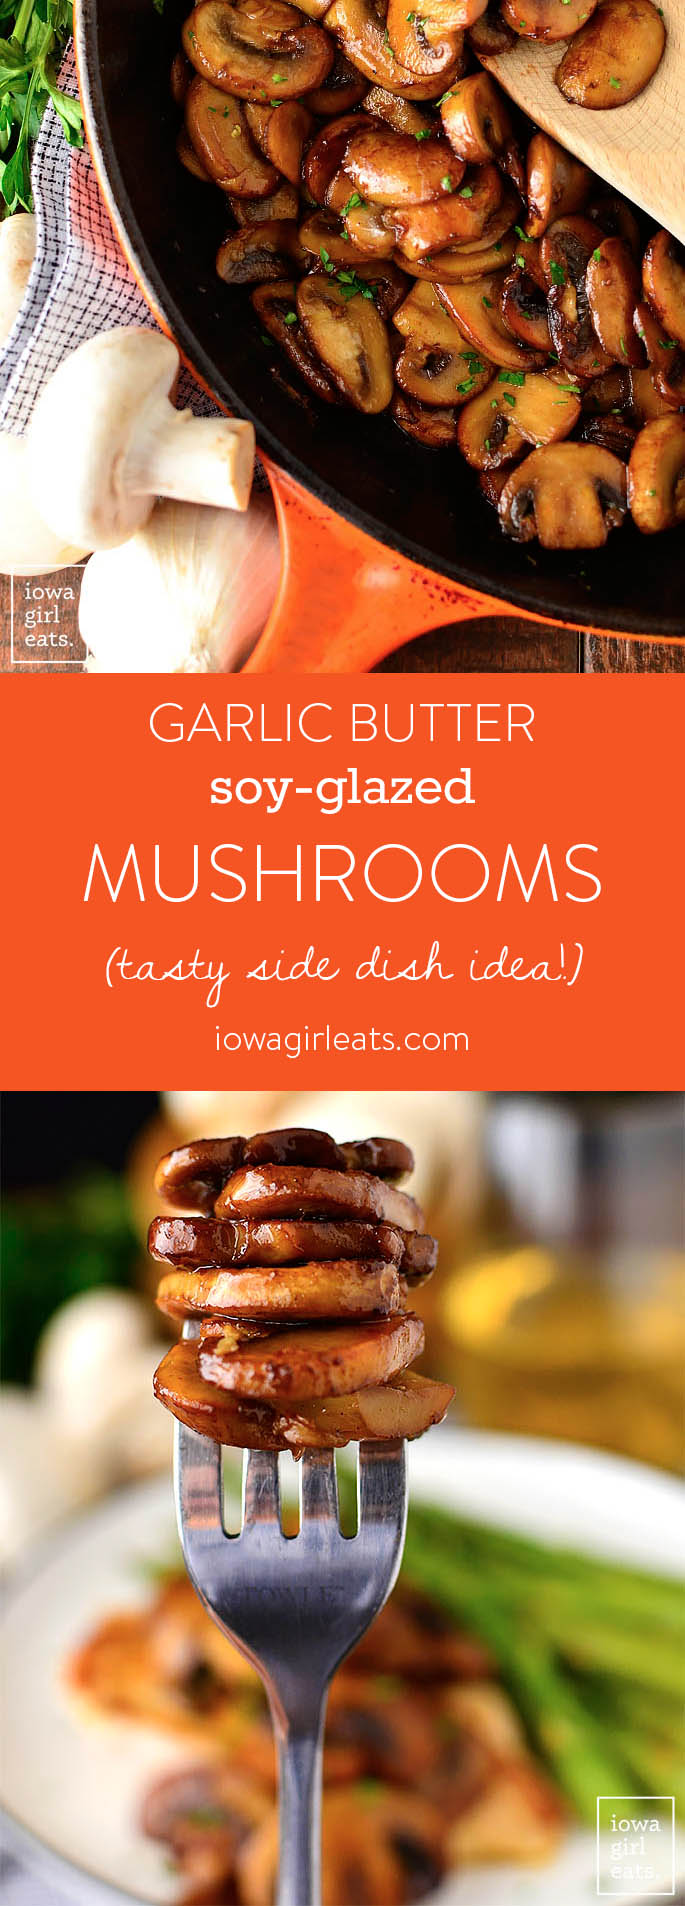 Garlic Butter Soy-Glazed Mushrooms is the easiest, most mouthwatering gluten-free side dish recipe I know! Serve with chicken, burgers, steak, or baked potatoes. | iowagirleats.com